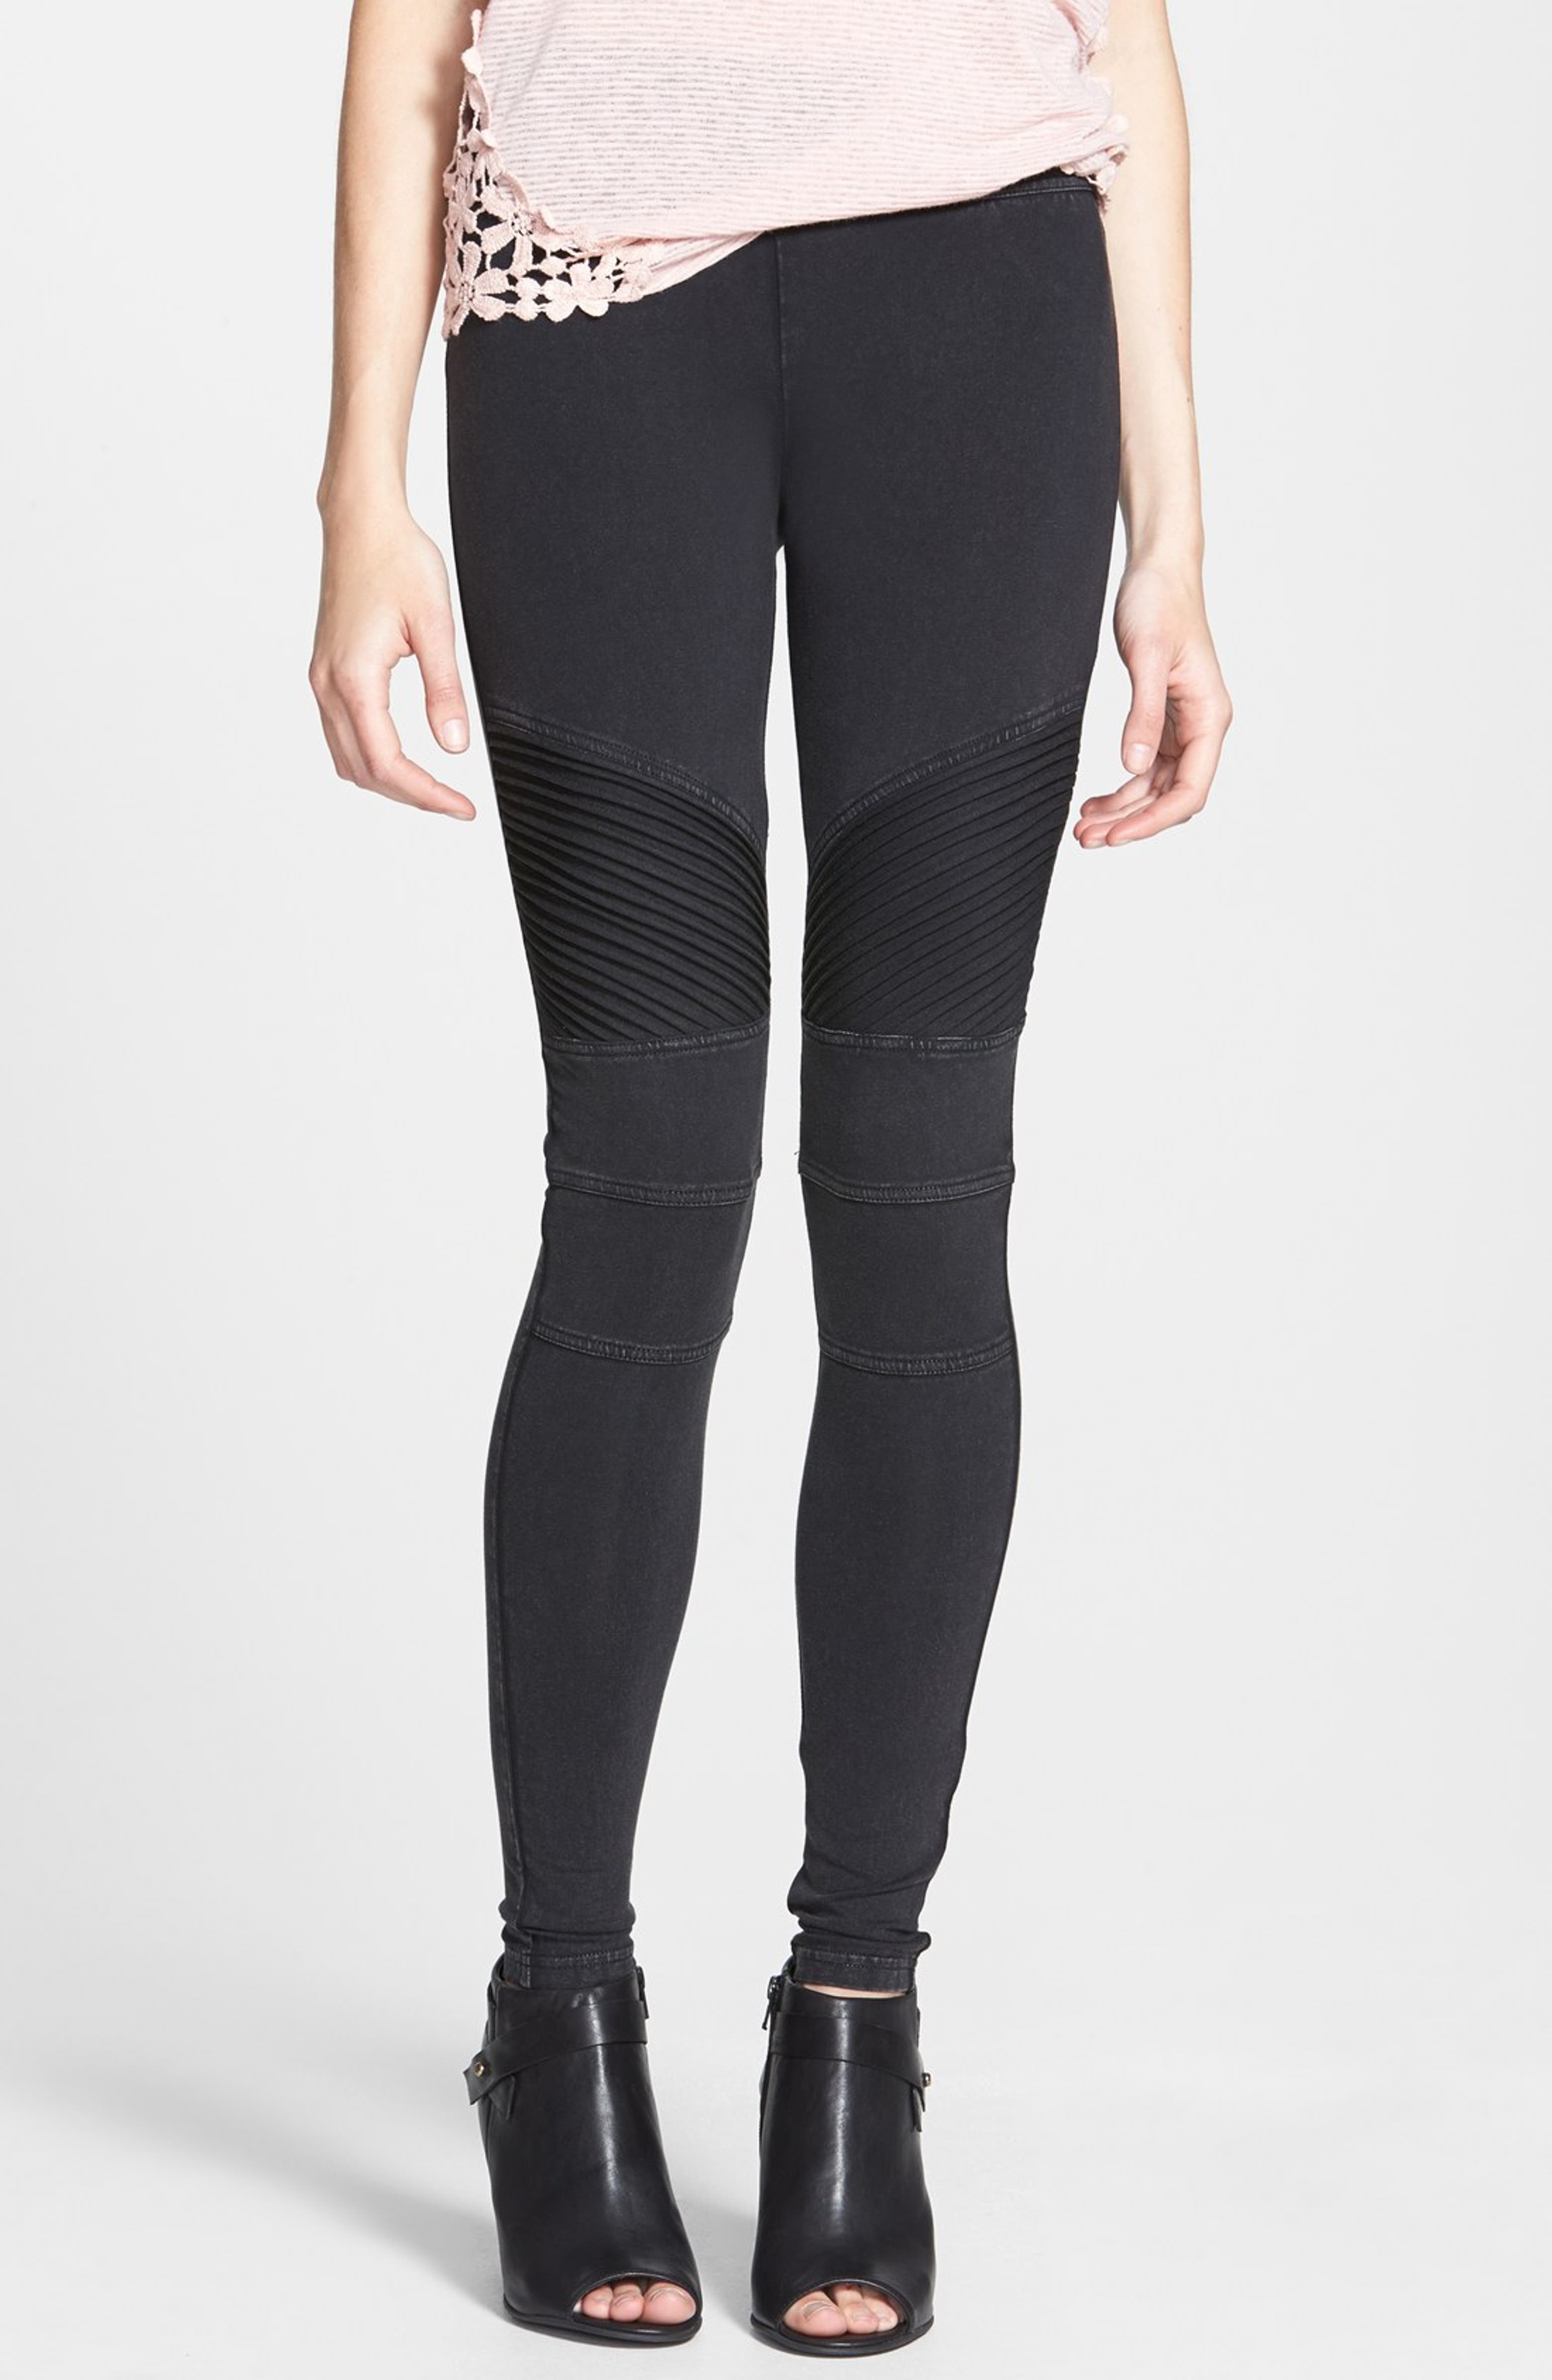 Gym Leggings Sale  International Society of Precision Agriculture